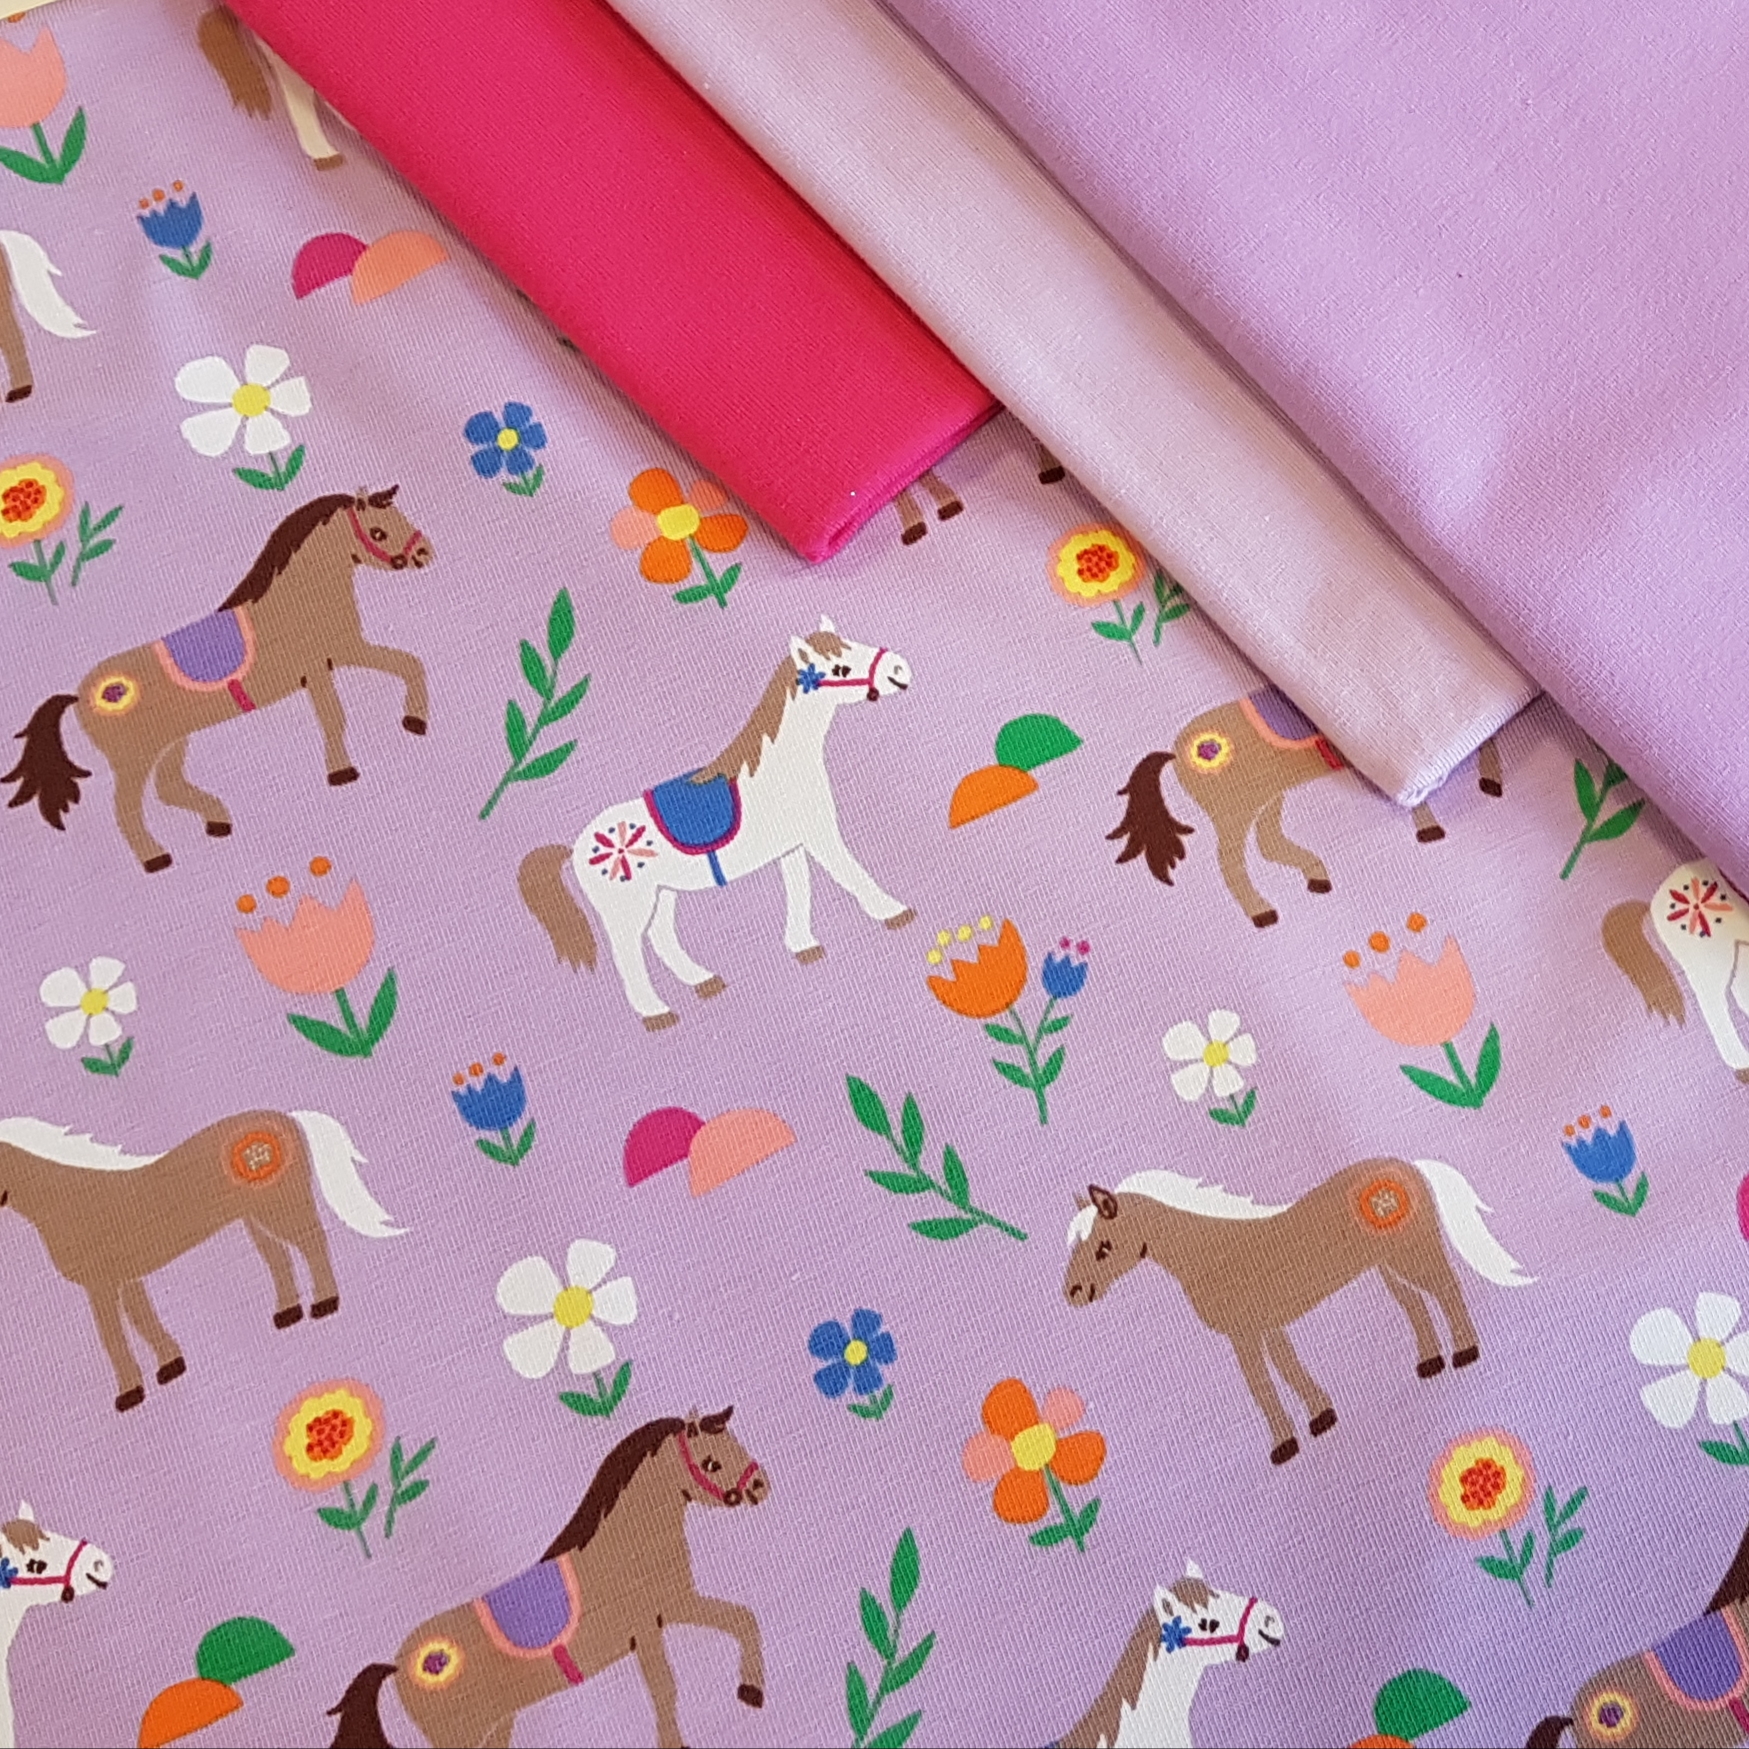 My Little Pony cotton jersey stretch fabric knit pony ponies unicorns horses colourful bright pink purple green yellow girls fabric